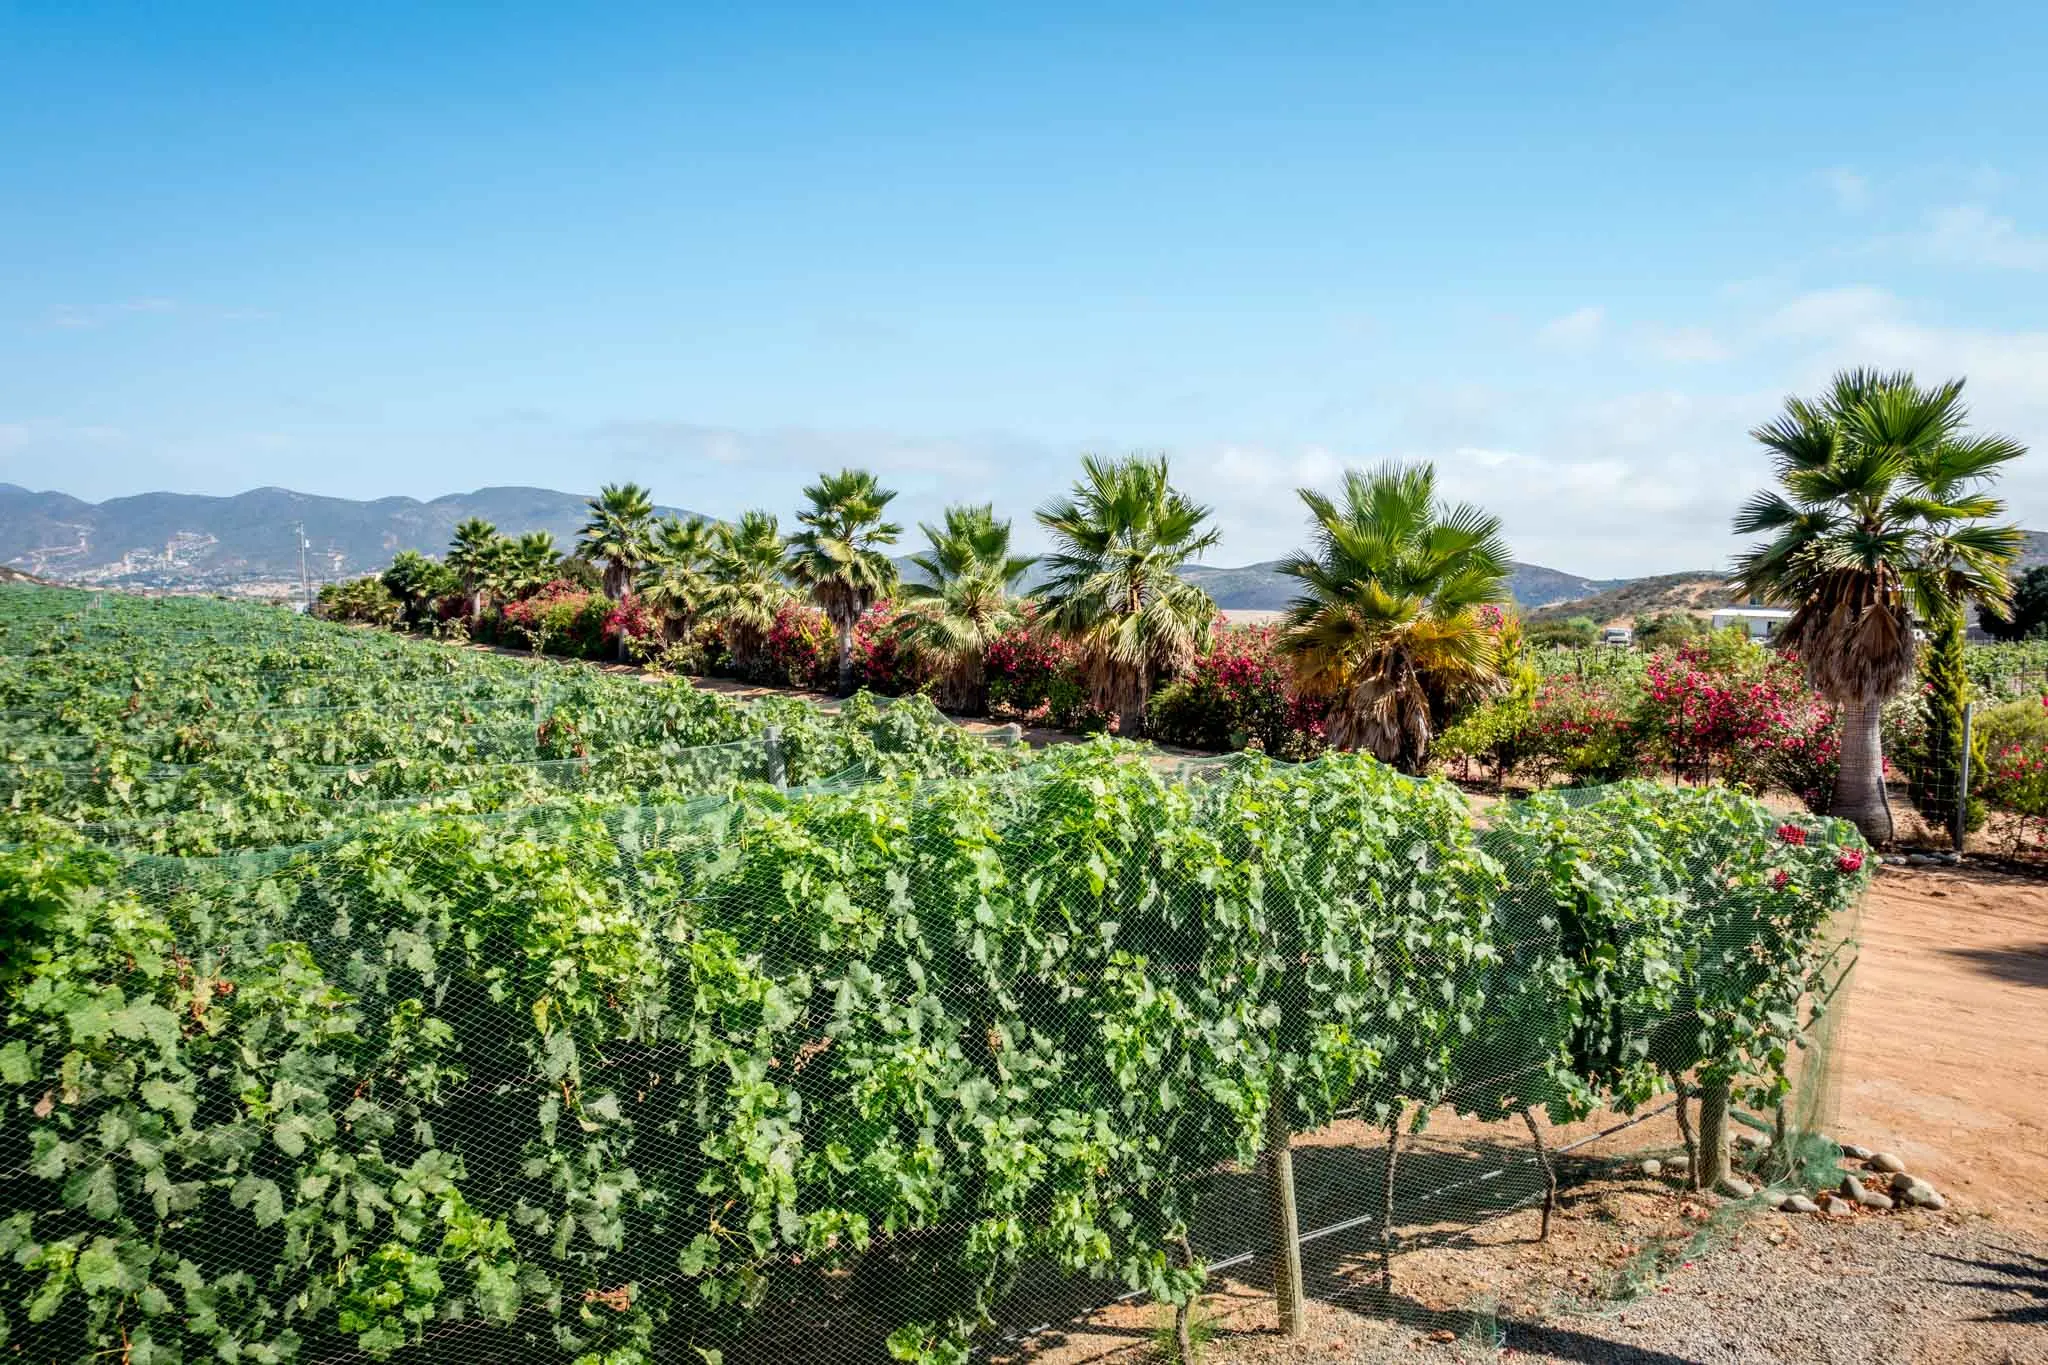 Rows of grape vines with palm trees in Baja Mexico